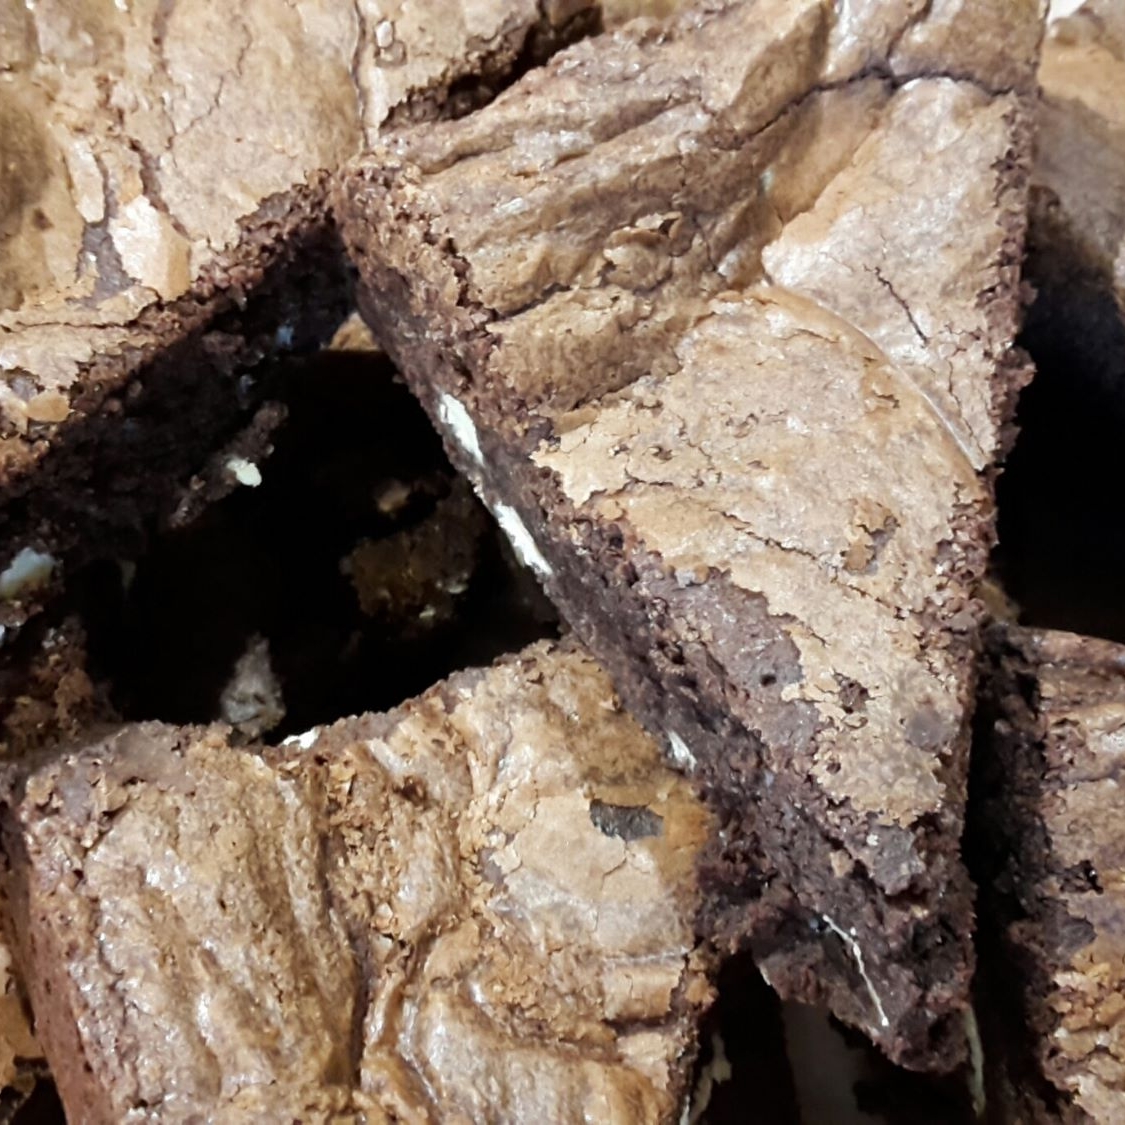 Chocolate Brownies made with Gluten Free Flour